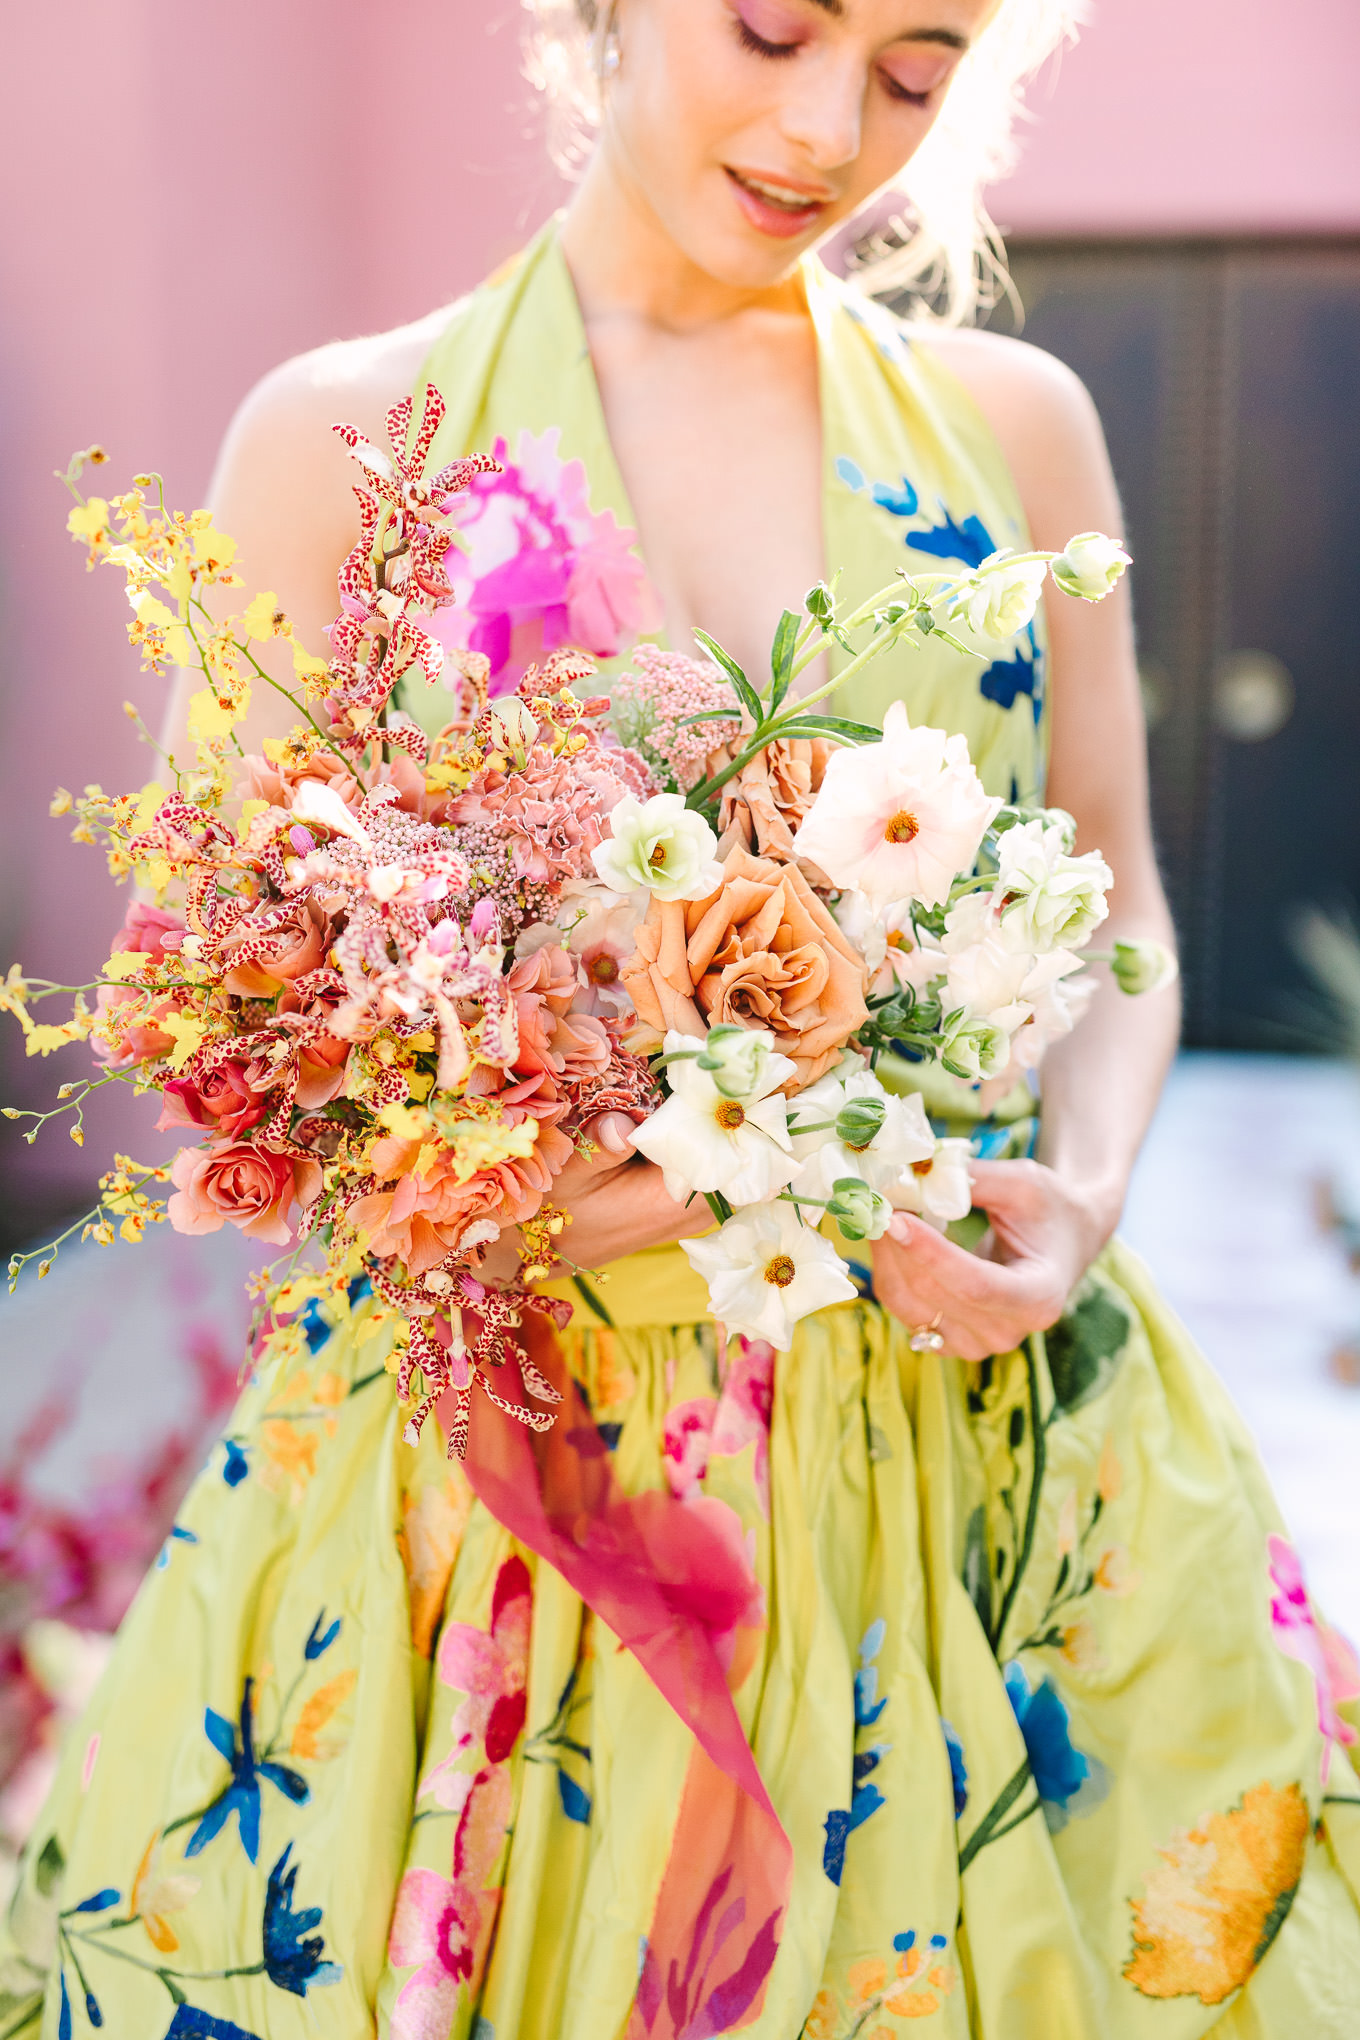 Colorful bridal bouquet on Marchesa gown | Kindred Presets x Mary Costa Photography Sands Hotel Ad Campaign | Colorful Palm Springs wedding photography | #palmspringsphotographer #lightroompresets #sandshotel #pinkhotel   Source: Mary Costa Photography | Los Angeles